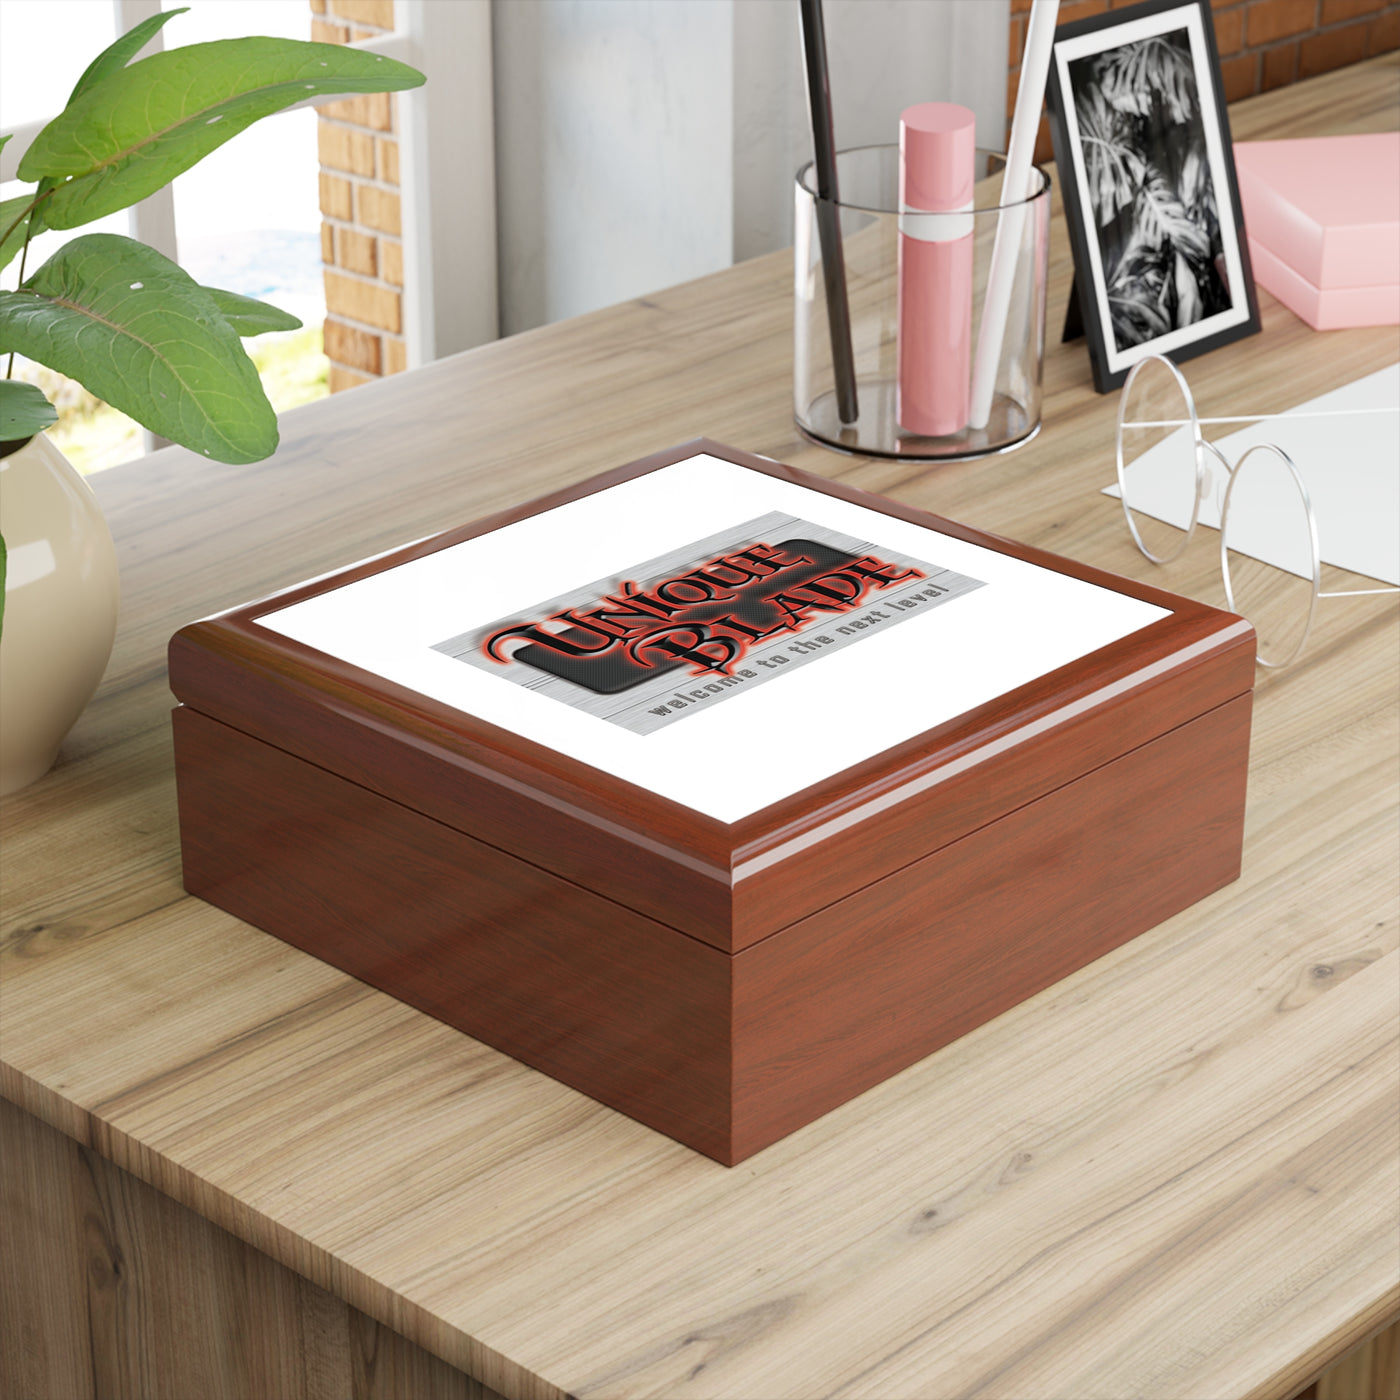 Jewelry Box - A decorative and functional box designed for storing and organizing jewelry items, keeping them safe and accessible.